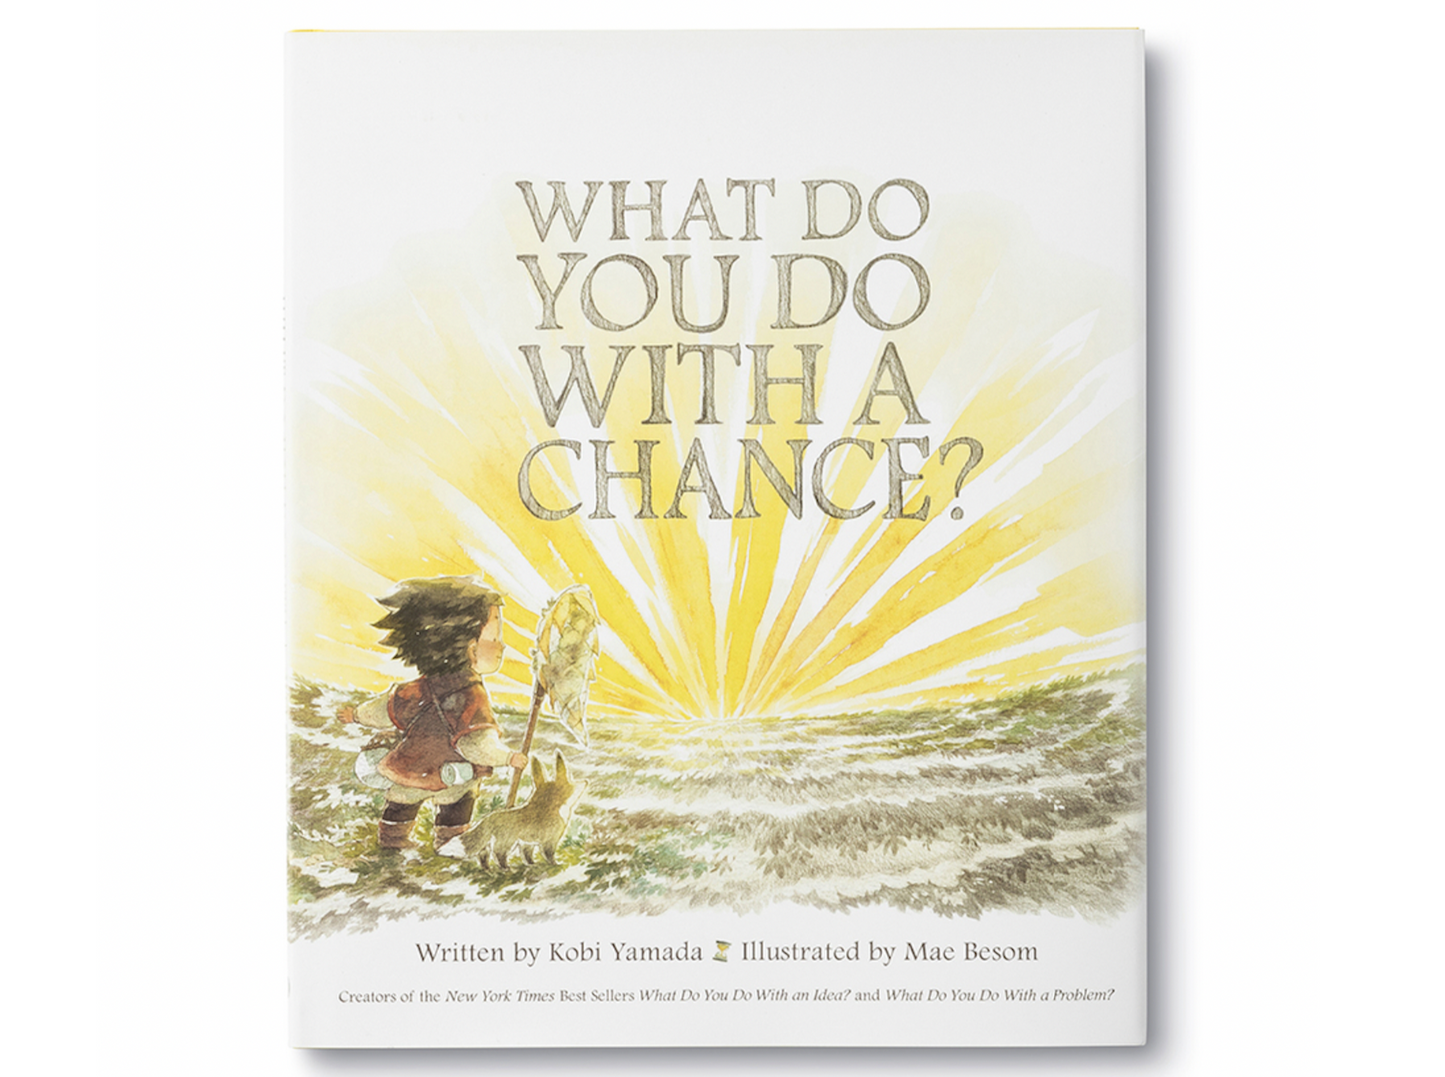 What Do You Do With A Chance?